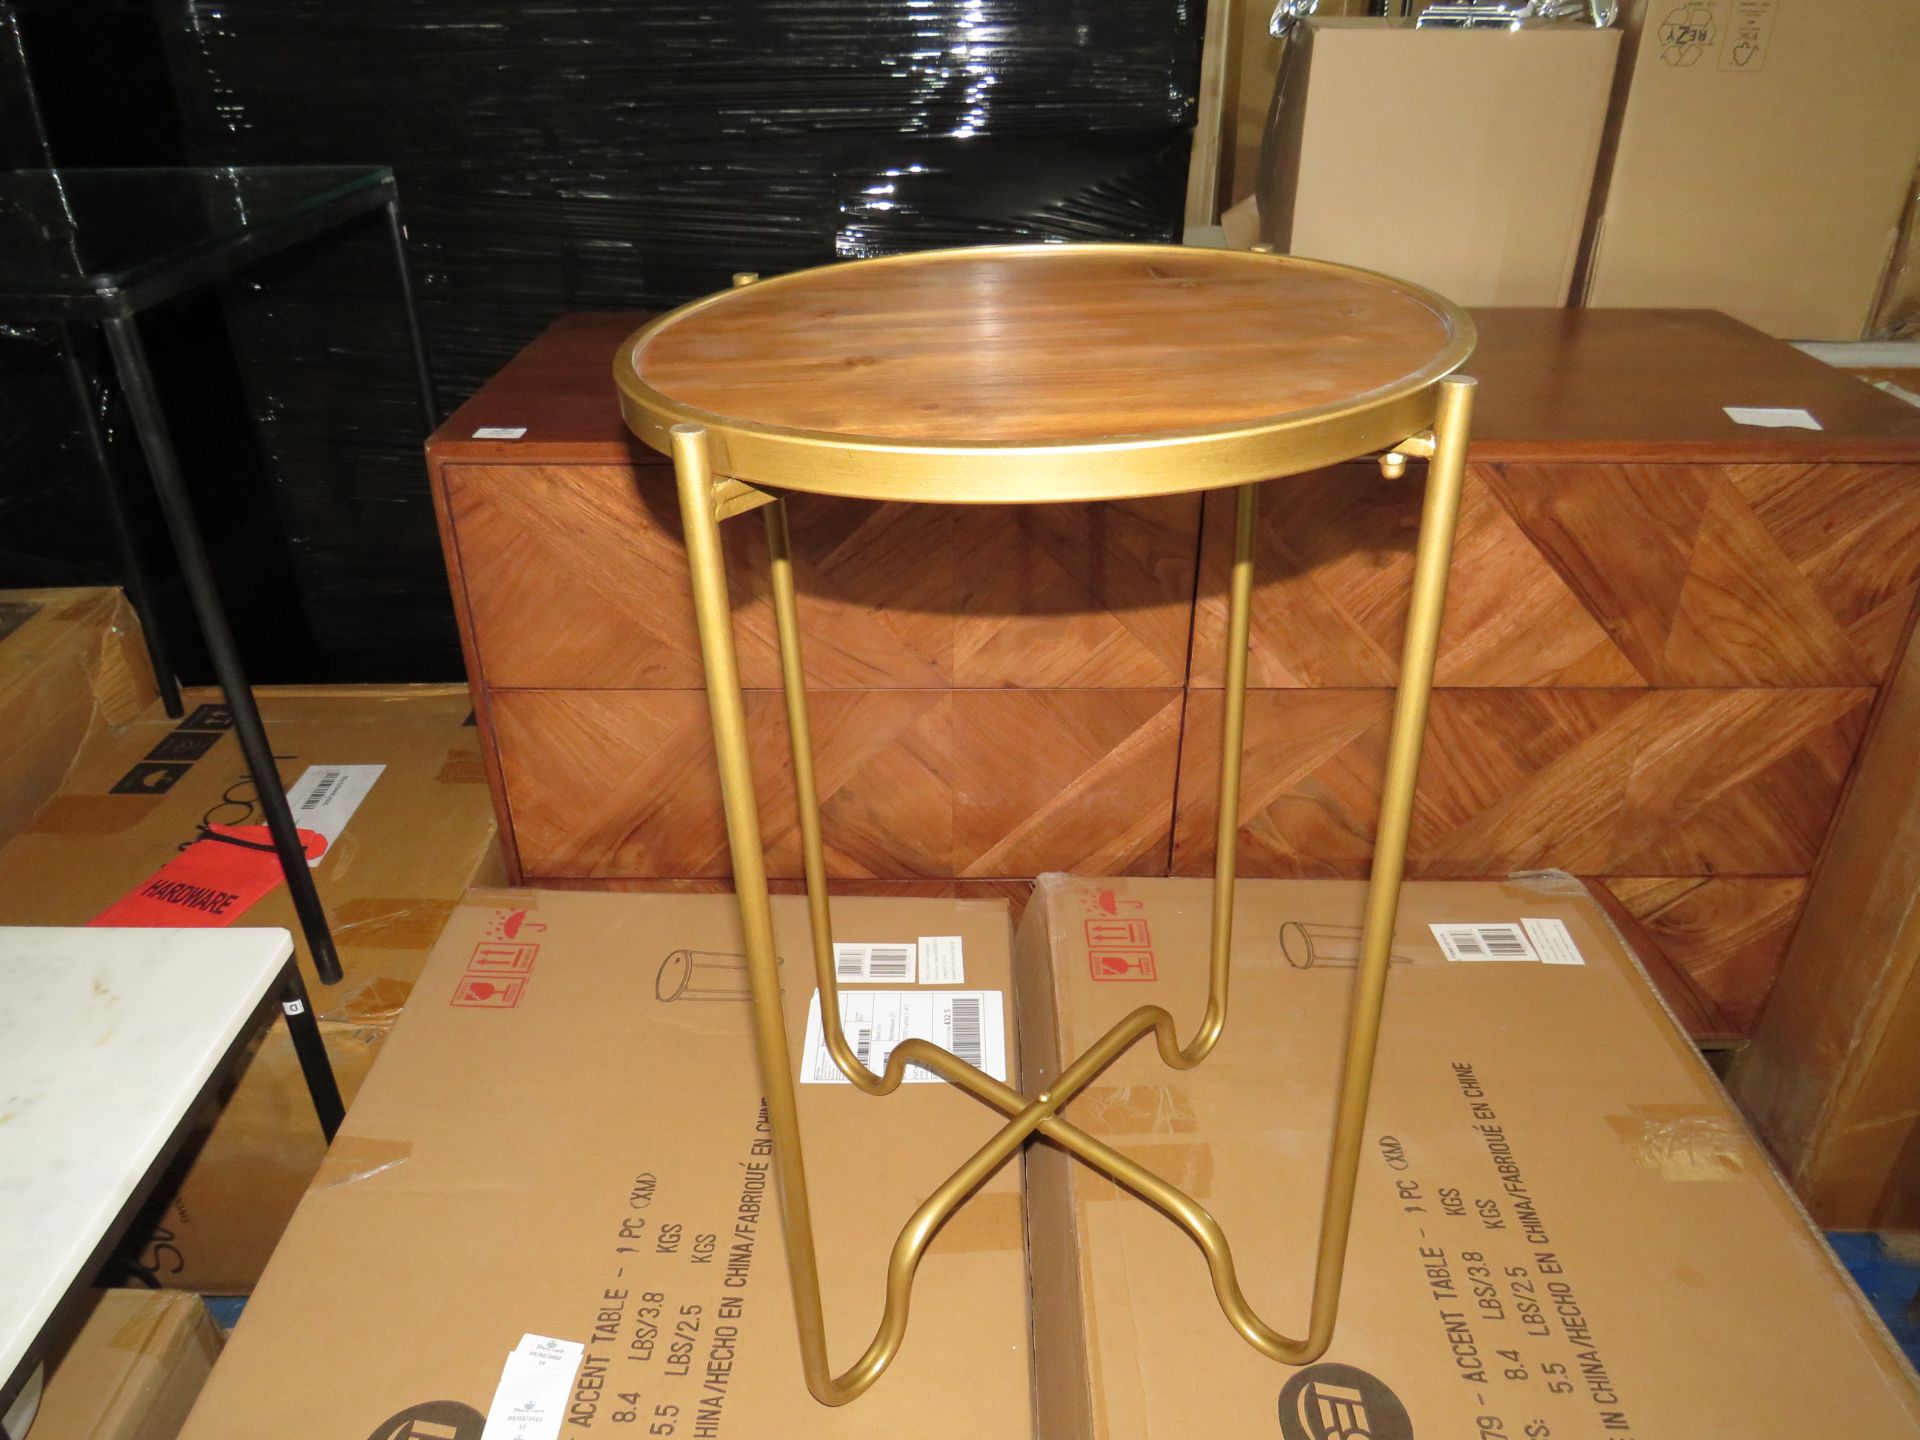 SEI Furniture Accent Table RRP Â£82.99 Find organic style with this round, wood-top accent table.